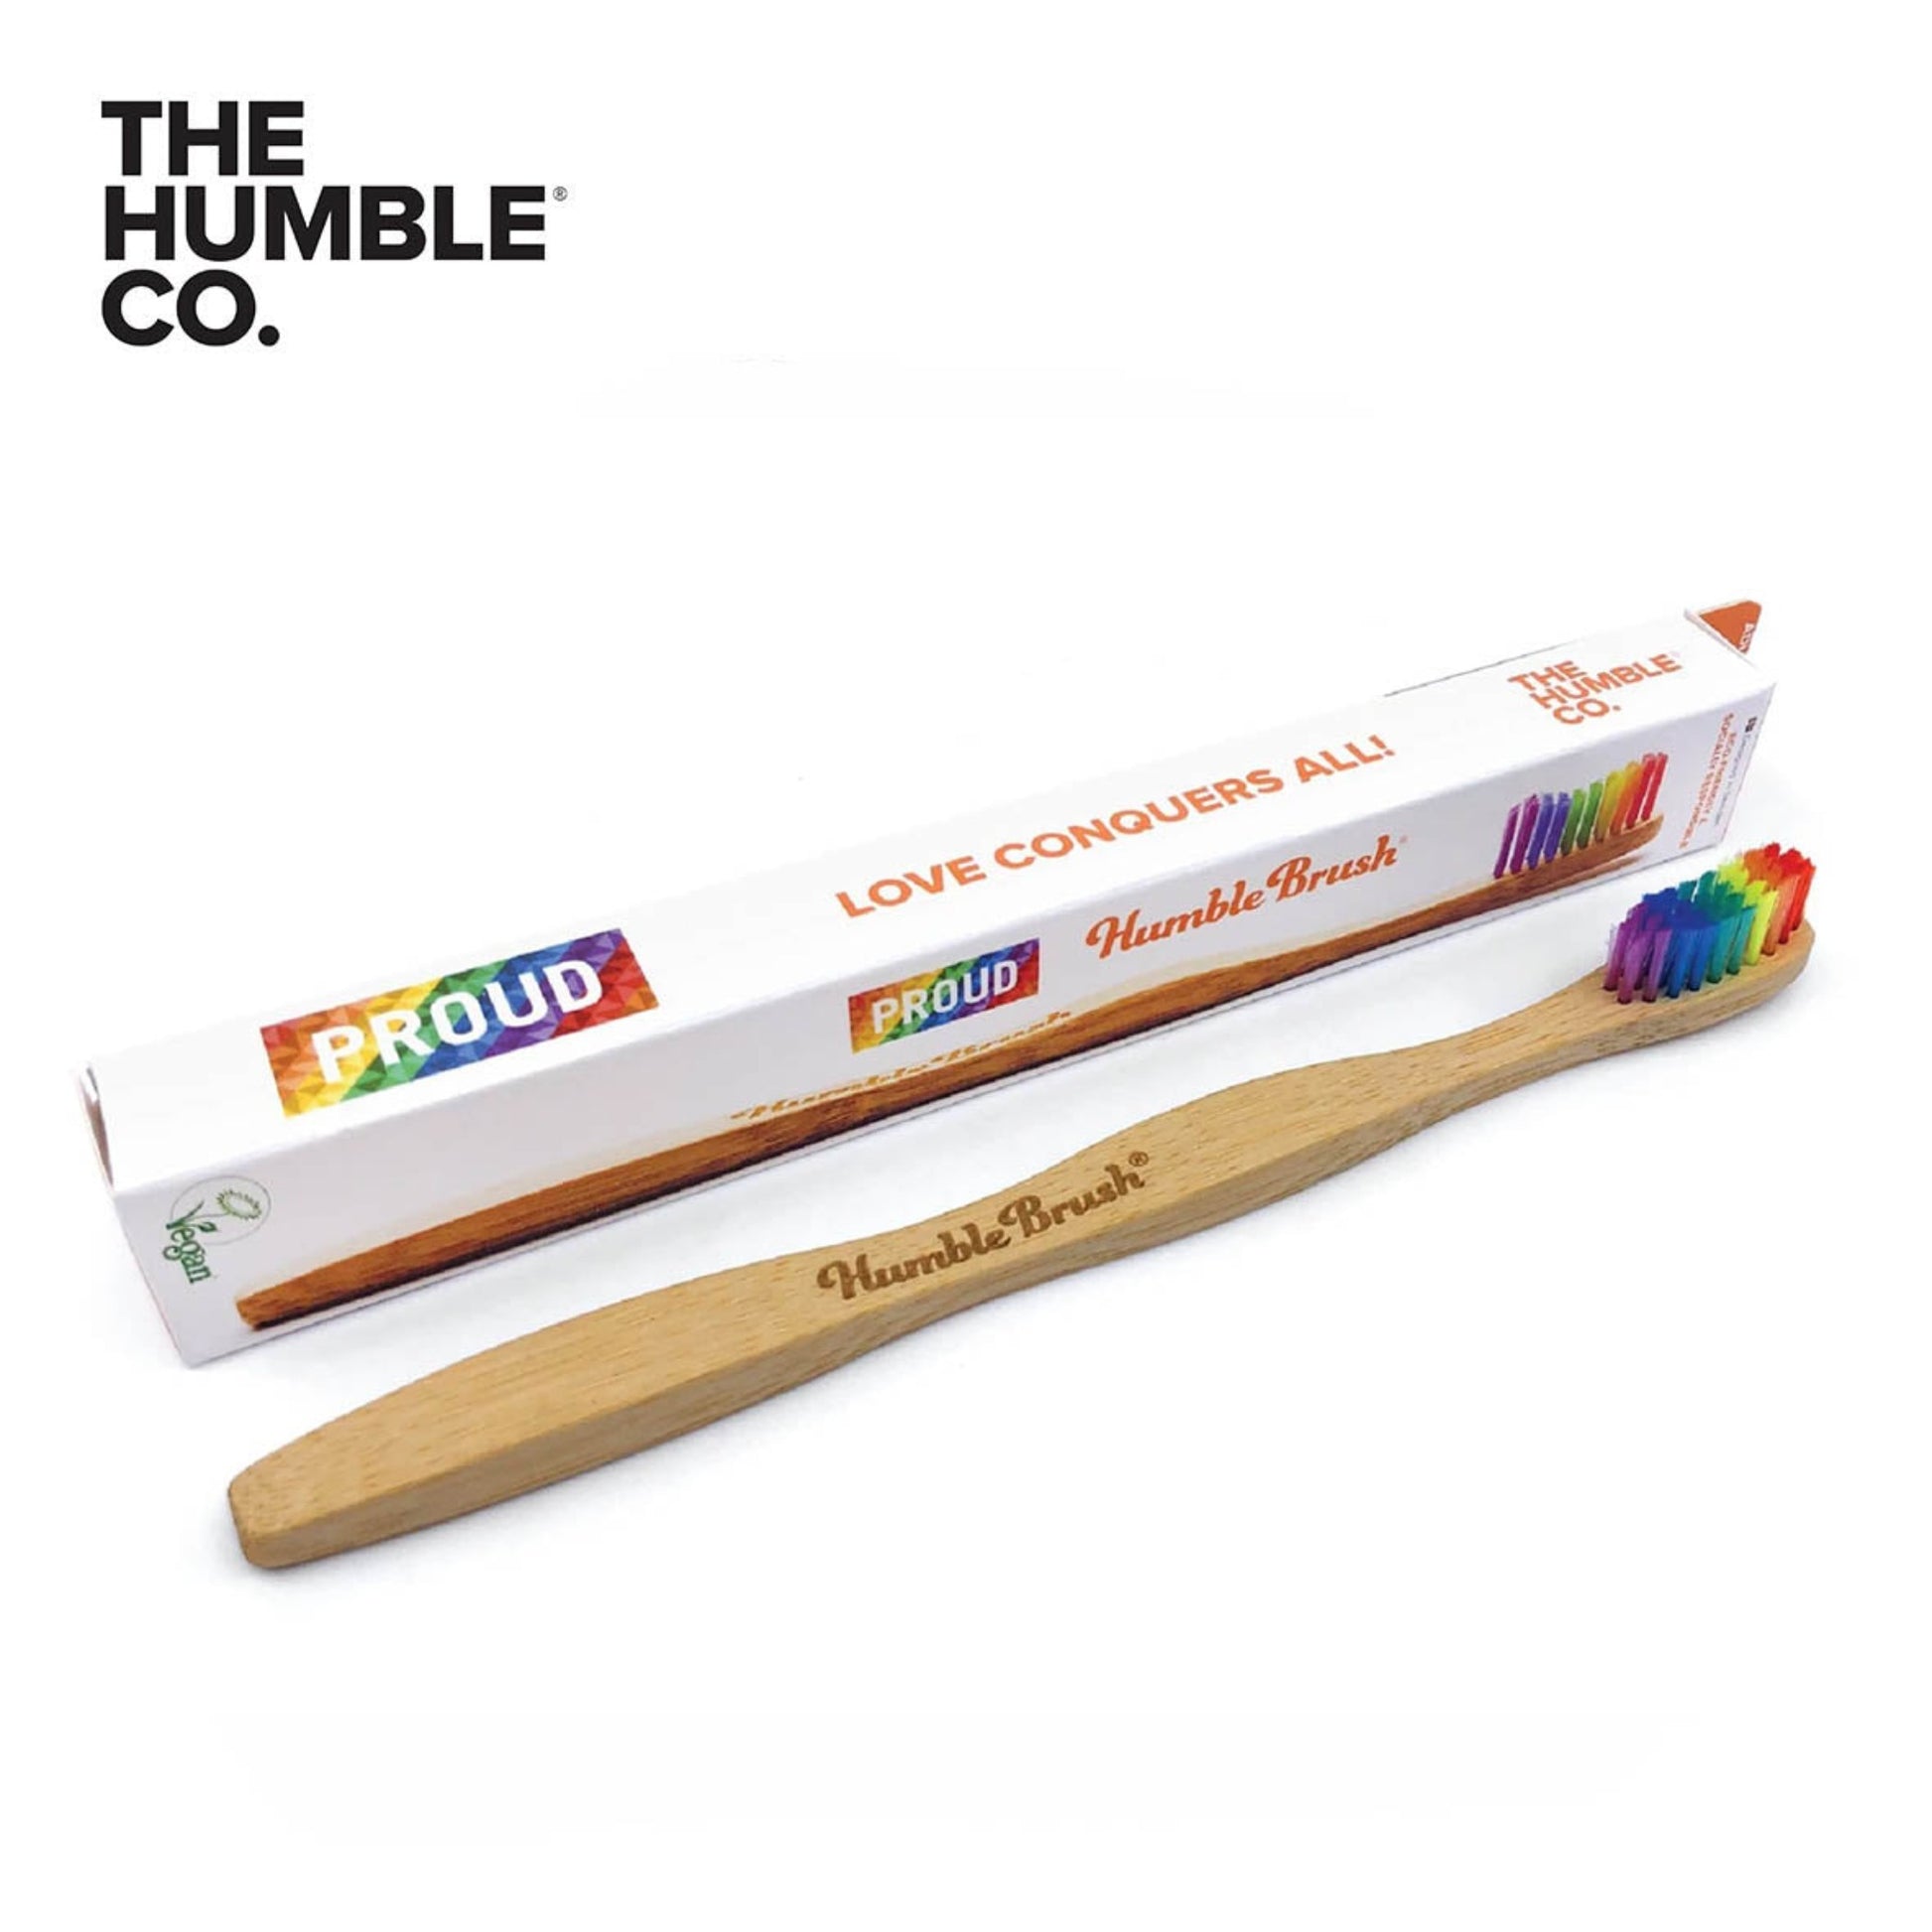 THE HUMBLE CO. Bamboo Toothbrush Adults, Soft, PROUD Limited Edition (4620411535425)